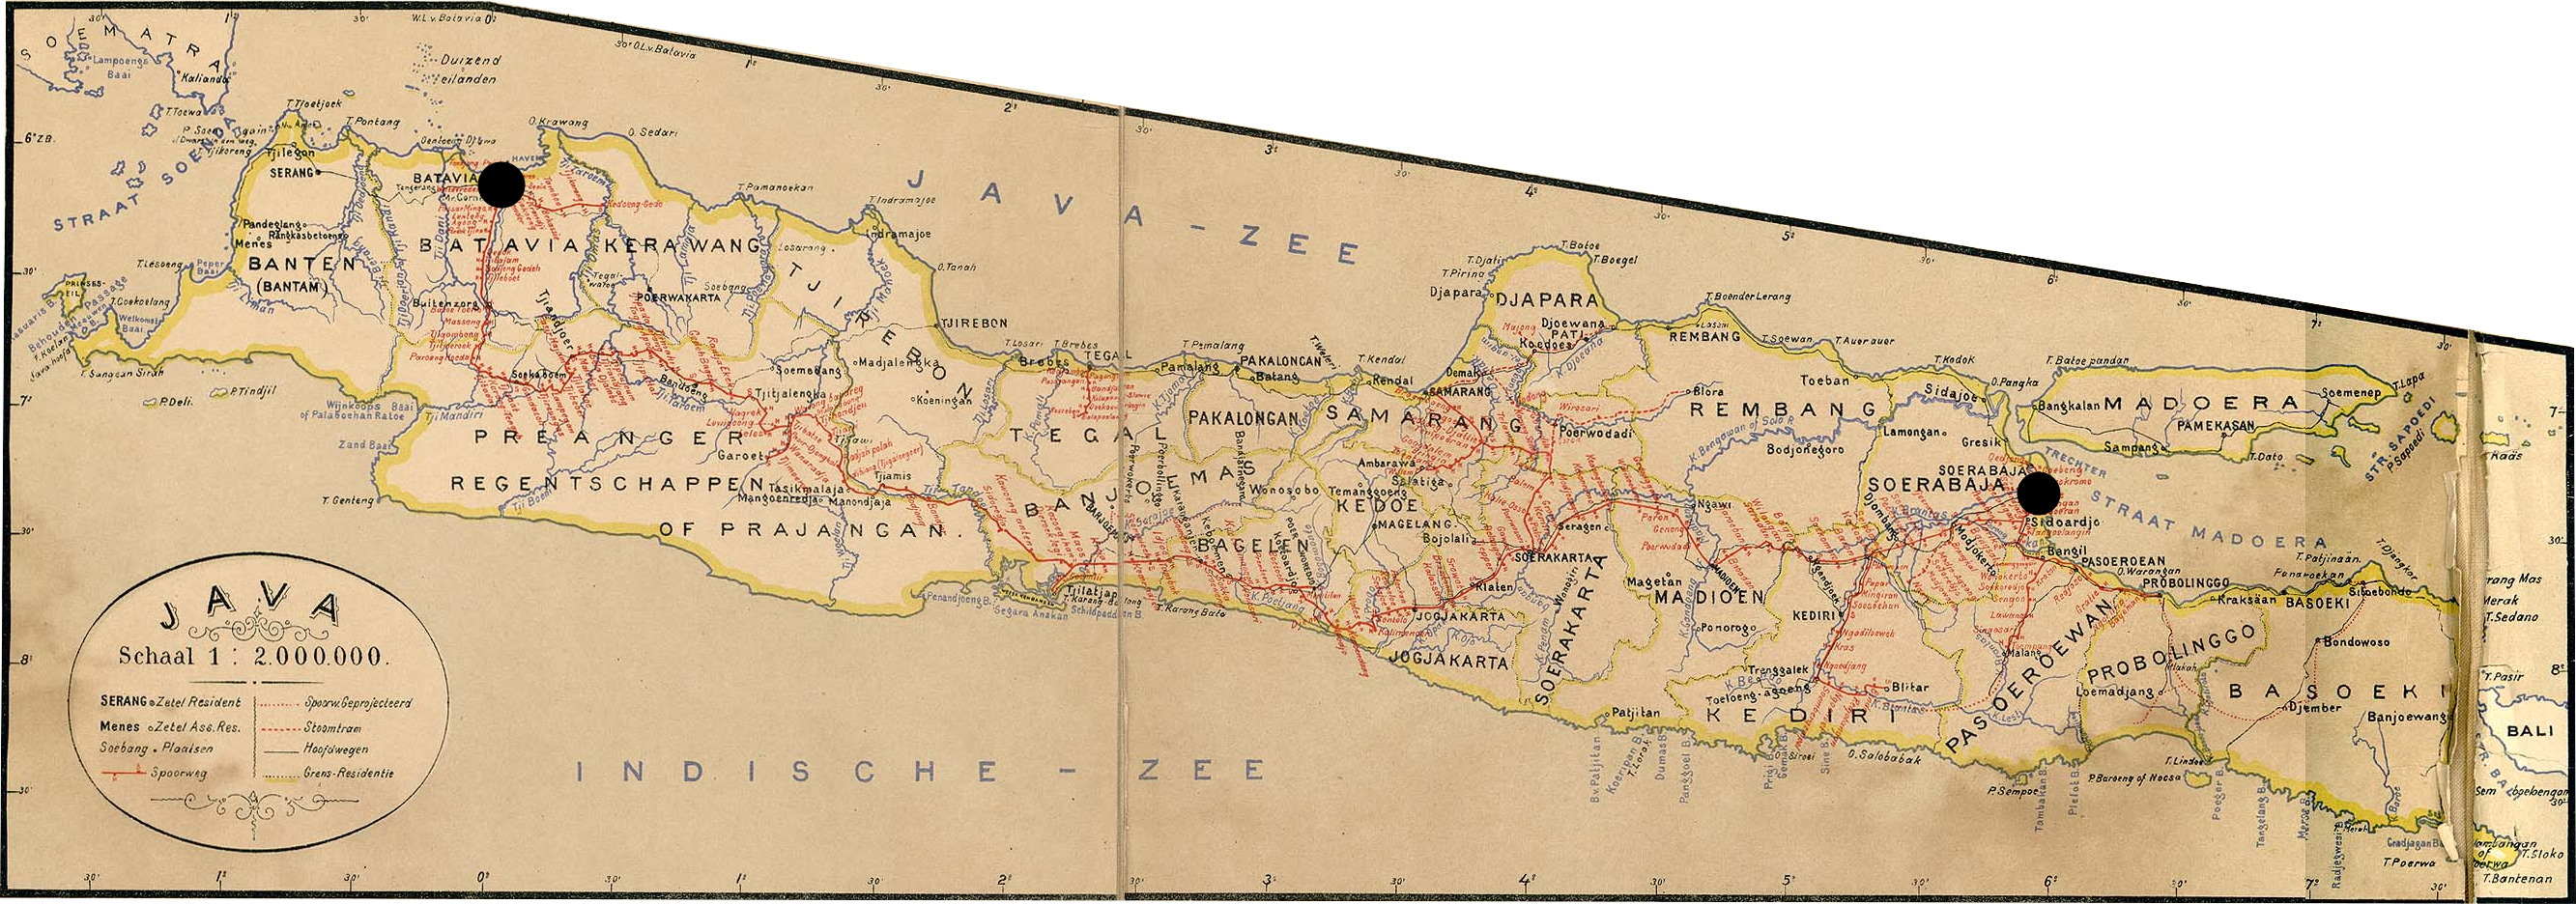 Java map railway connections 1893